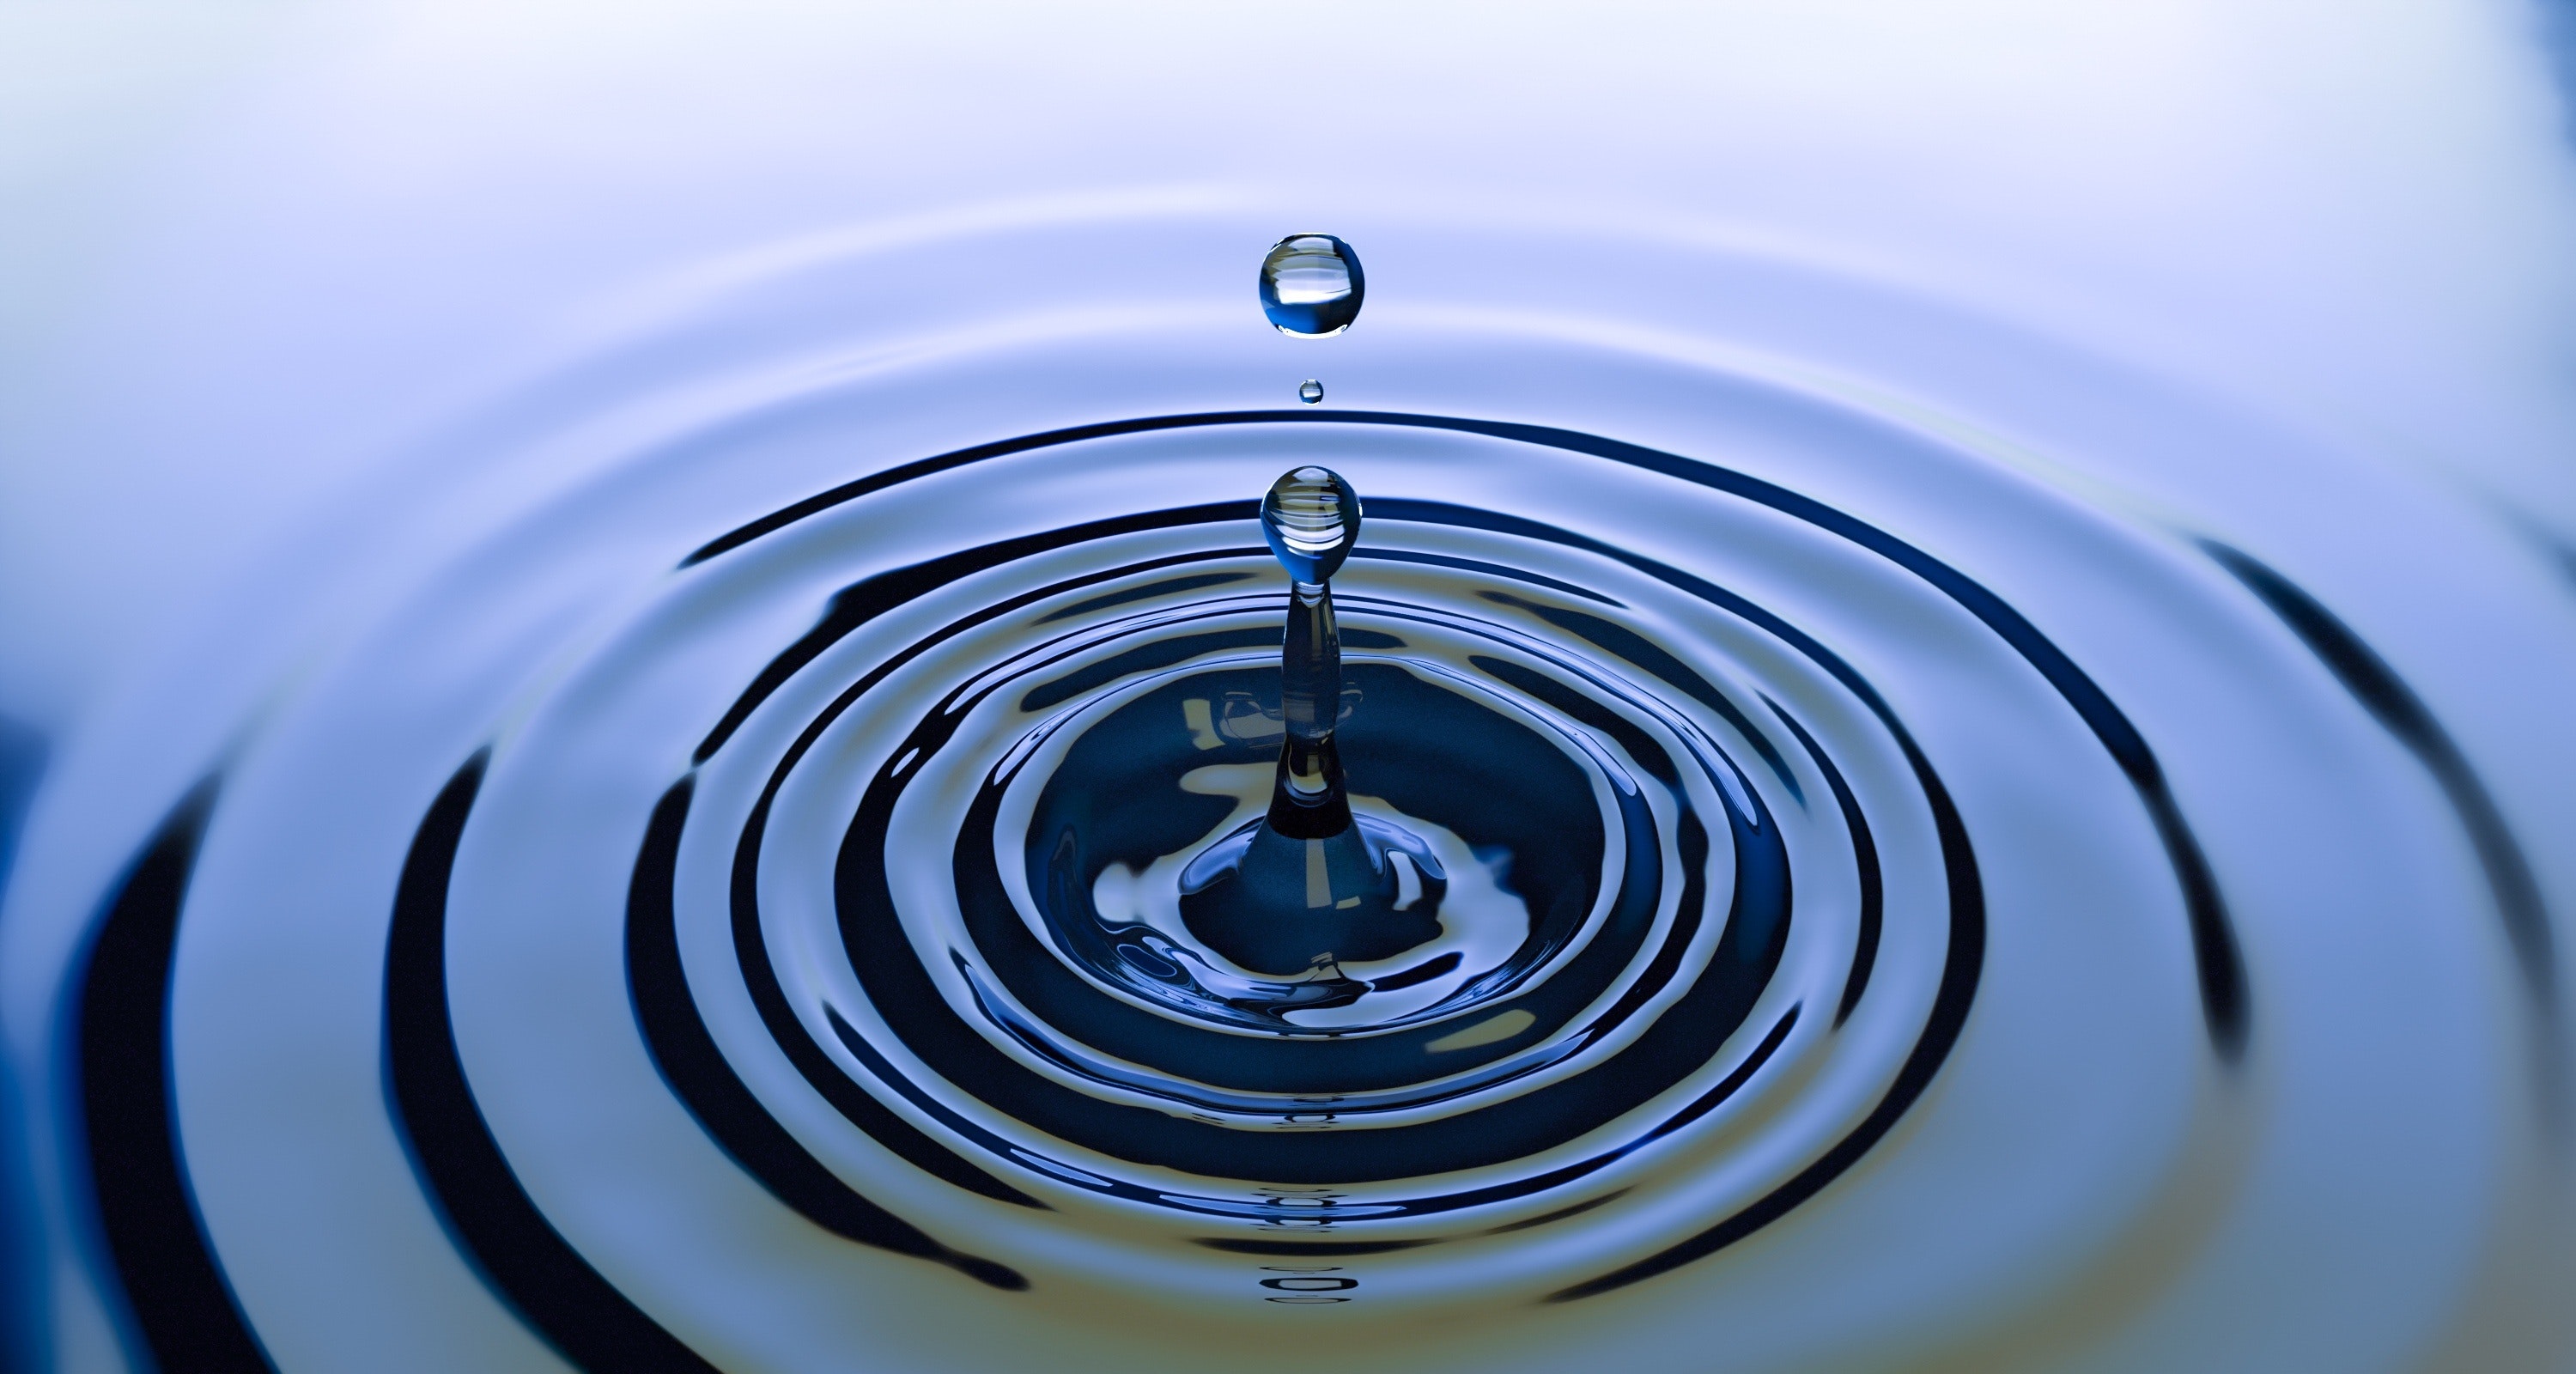 RIPPLE EFFECT | English meaning - Cambridge Dictionary